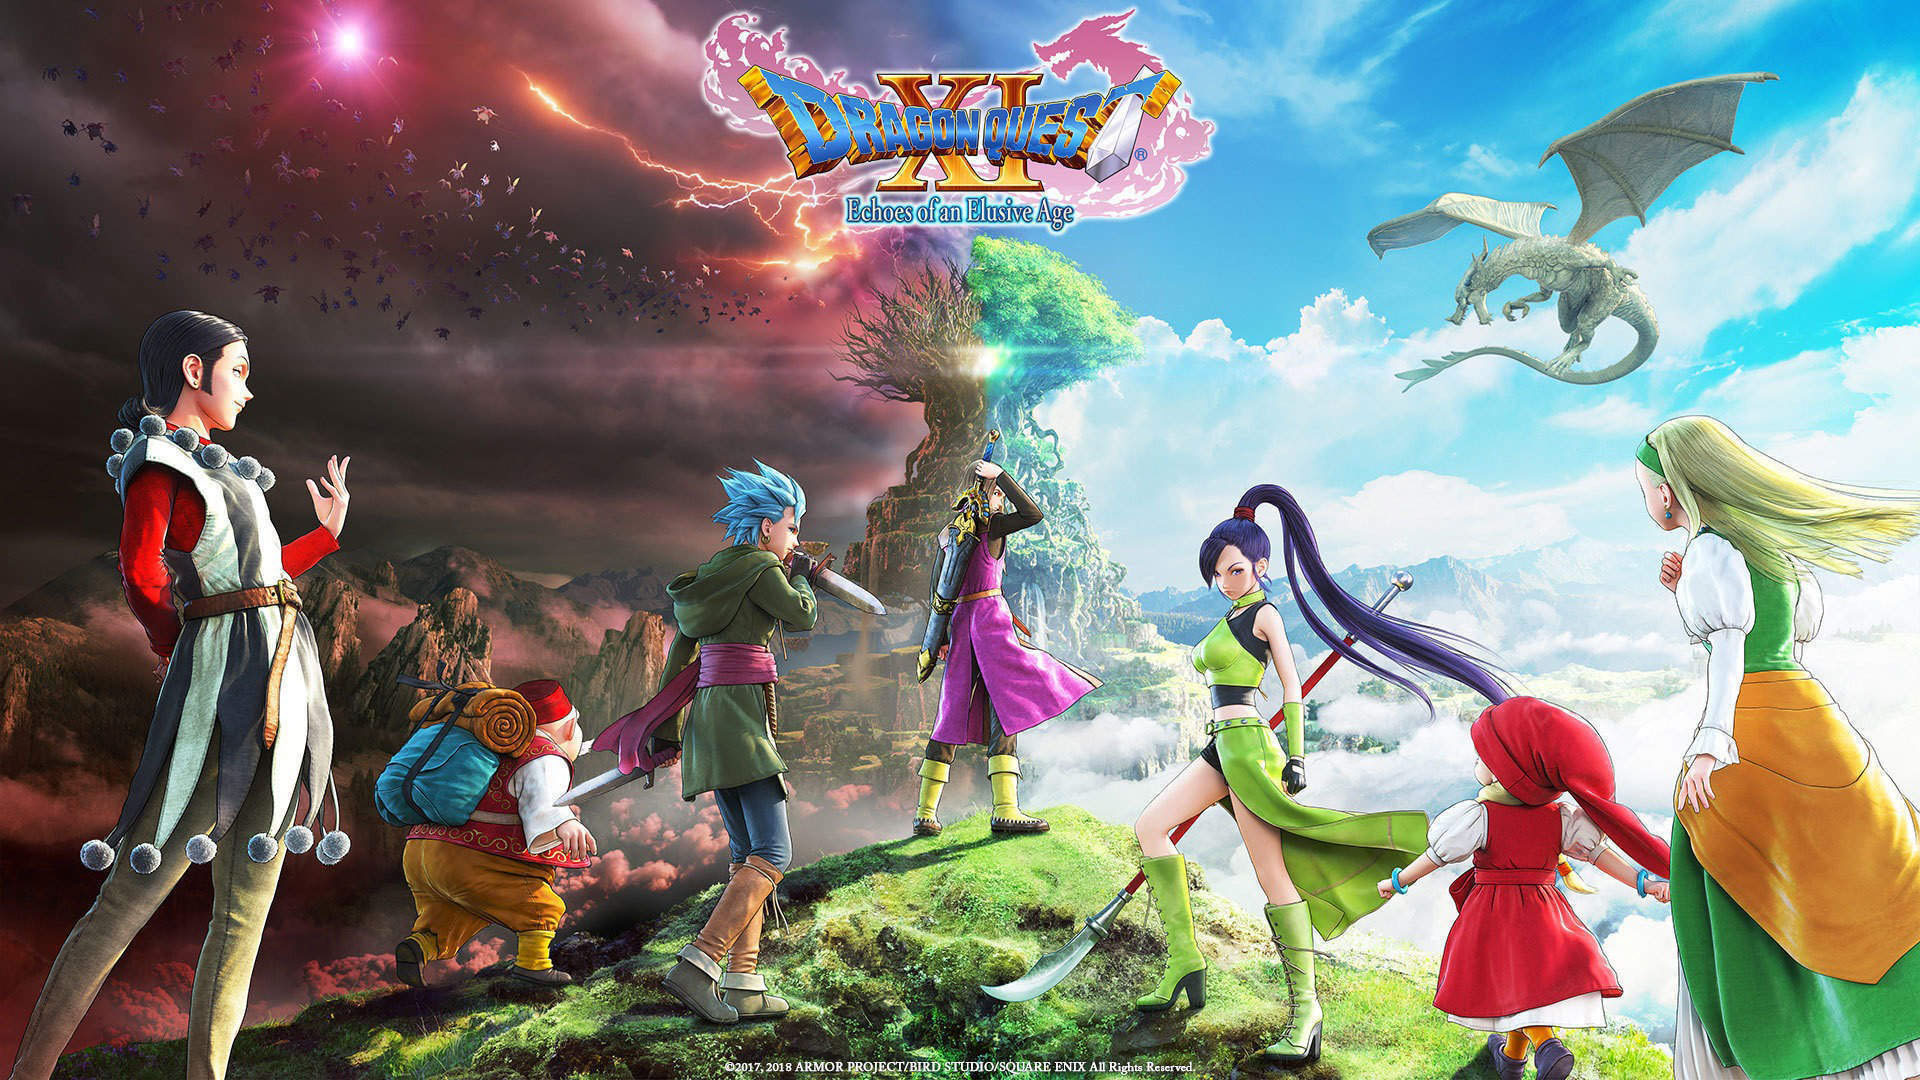 Dragon Quest XI: Echoes of an Elusive Age[c] is a role-playing video game developed and published by Square Enix. An entry in the long-running Dragon ...